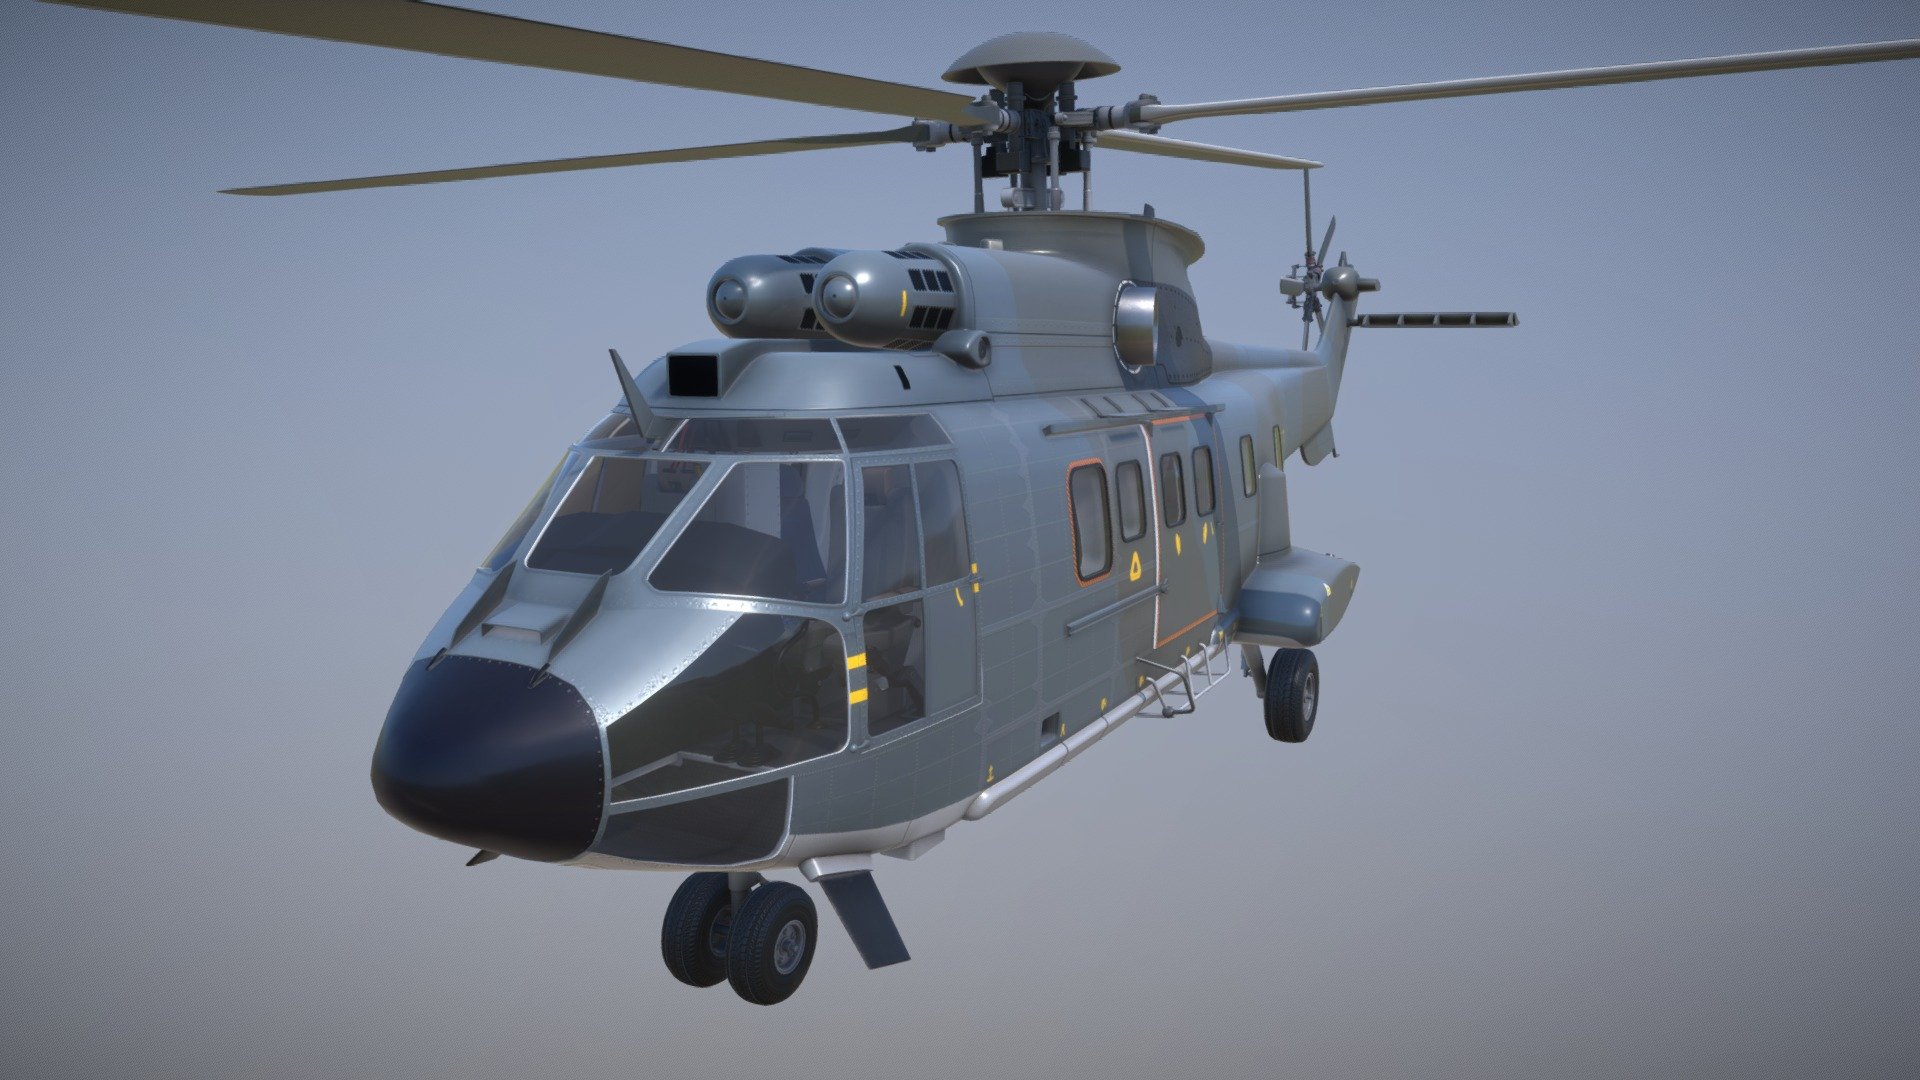 This model is GAME READY for Unity

File Formats:

3ds Max 2019 FBX (Multi Format)

Model: The Helicopter is modeled on a real scale.

Geometry count:




289,722 polys 

542,616 tris 

306,746 verts 

Textures: 2048x2048 3 Colors Albedo, Metallic, Normal Maps, Ambient Occlusion
Textures designed for physically based rendering (PBR) Textures in .png format

I have exported specialized texture maps for Unity 3d model